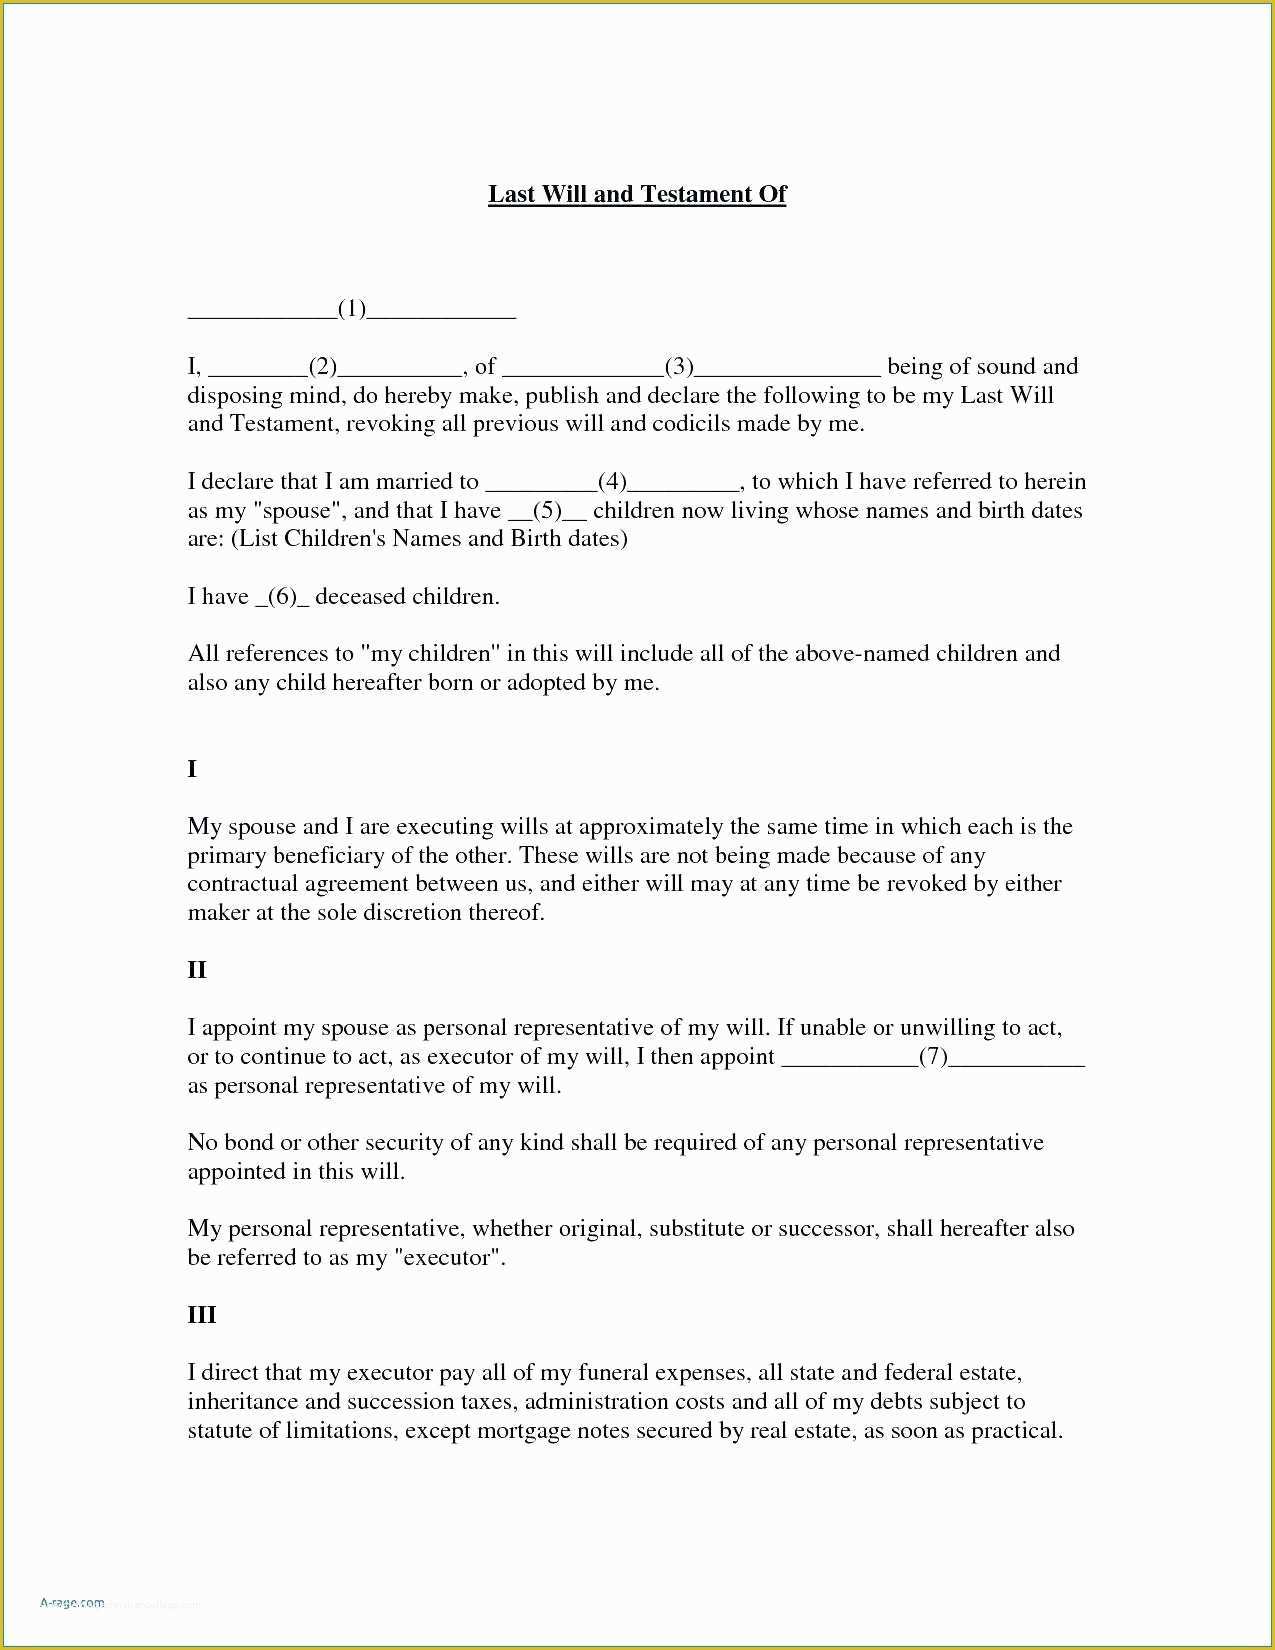 Last Will and Testament Arizona Template Free Of 2018 Living Will form